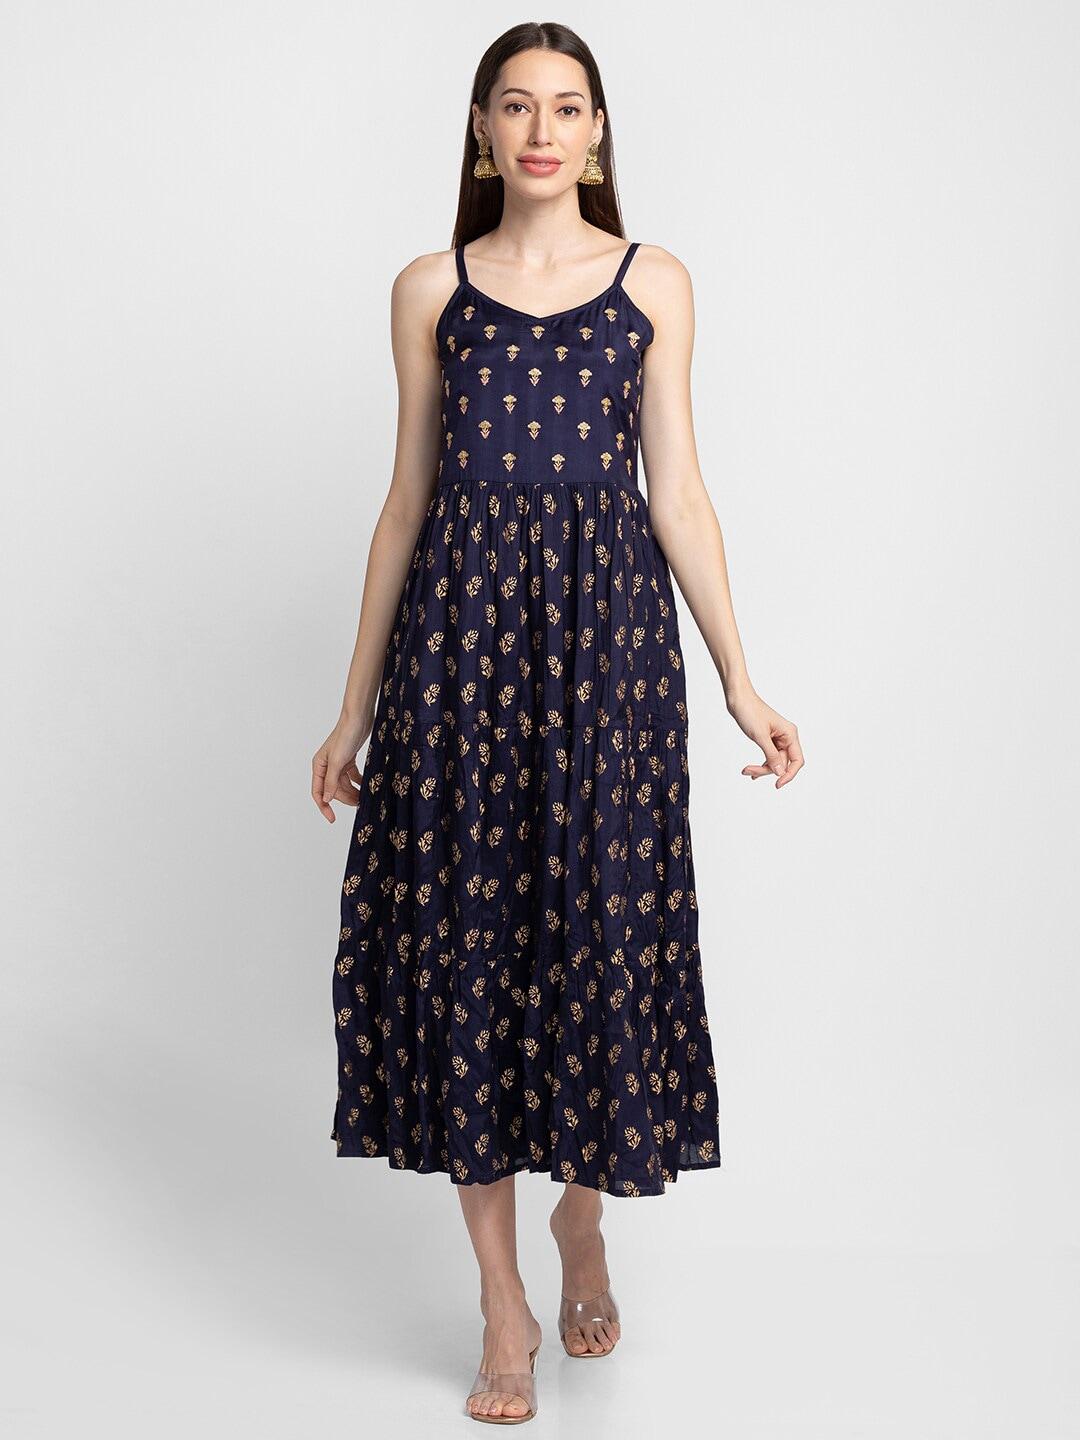 globus navy blue floral embroidered ethnic midi dress